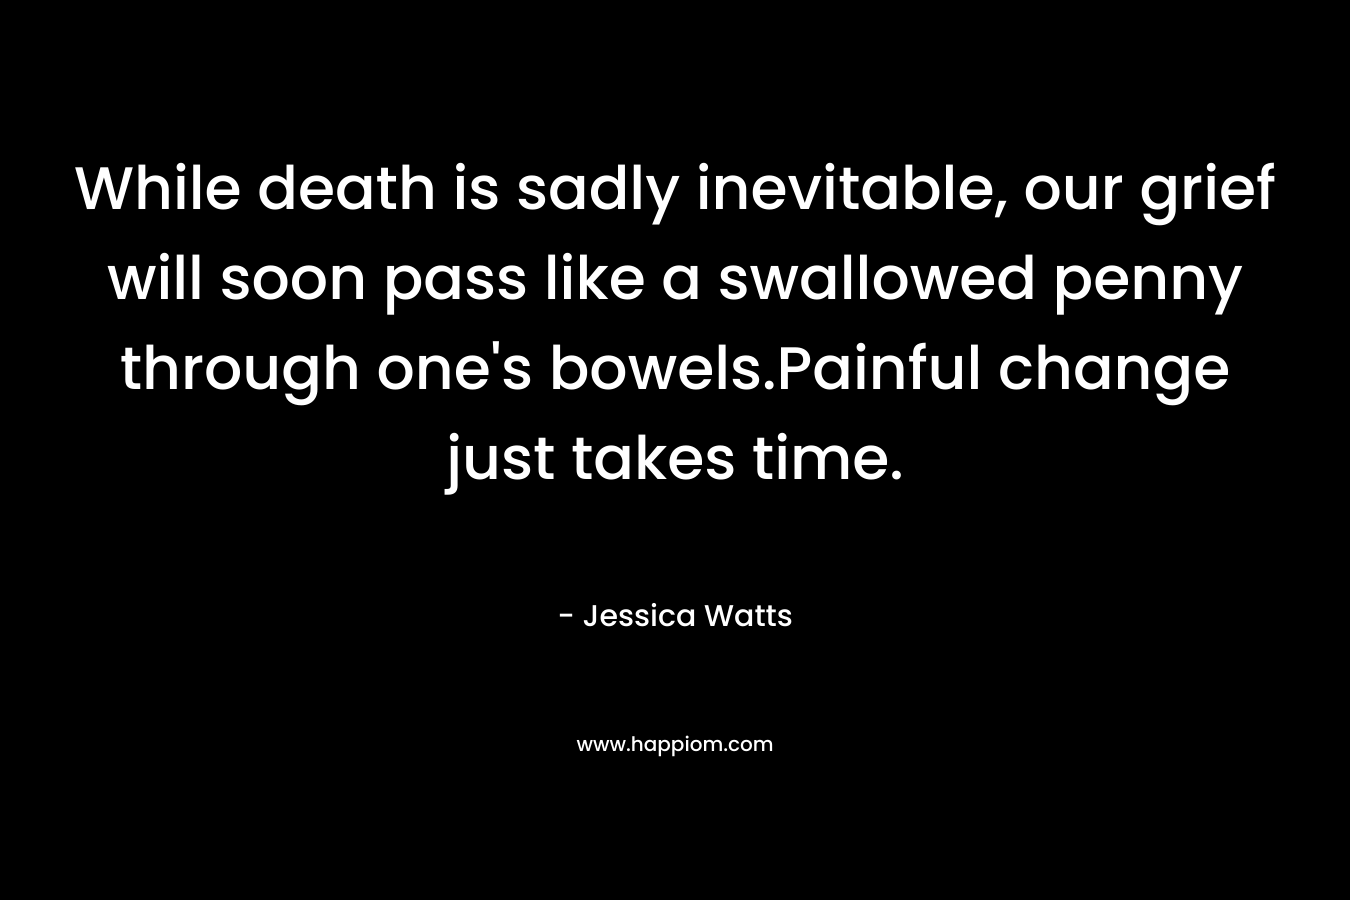 While death is sadly inevitable, our grief will soon pass like a swallowed penny through one’s bowels.Painful change just takes time. – Jessica Watts